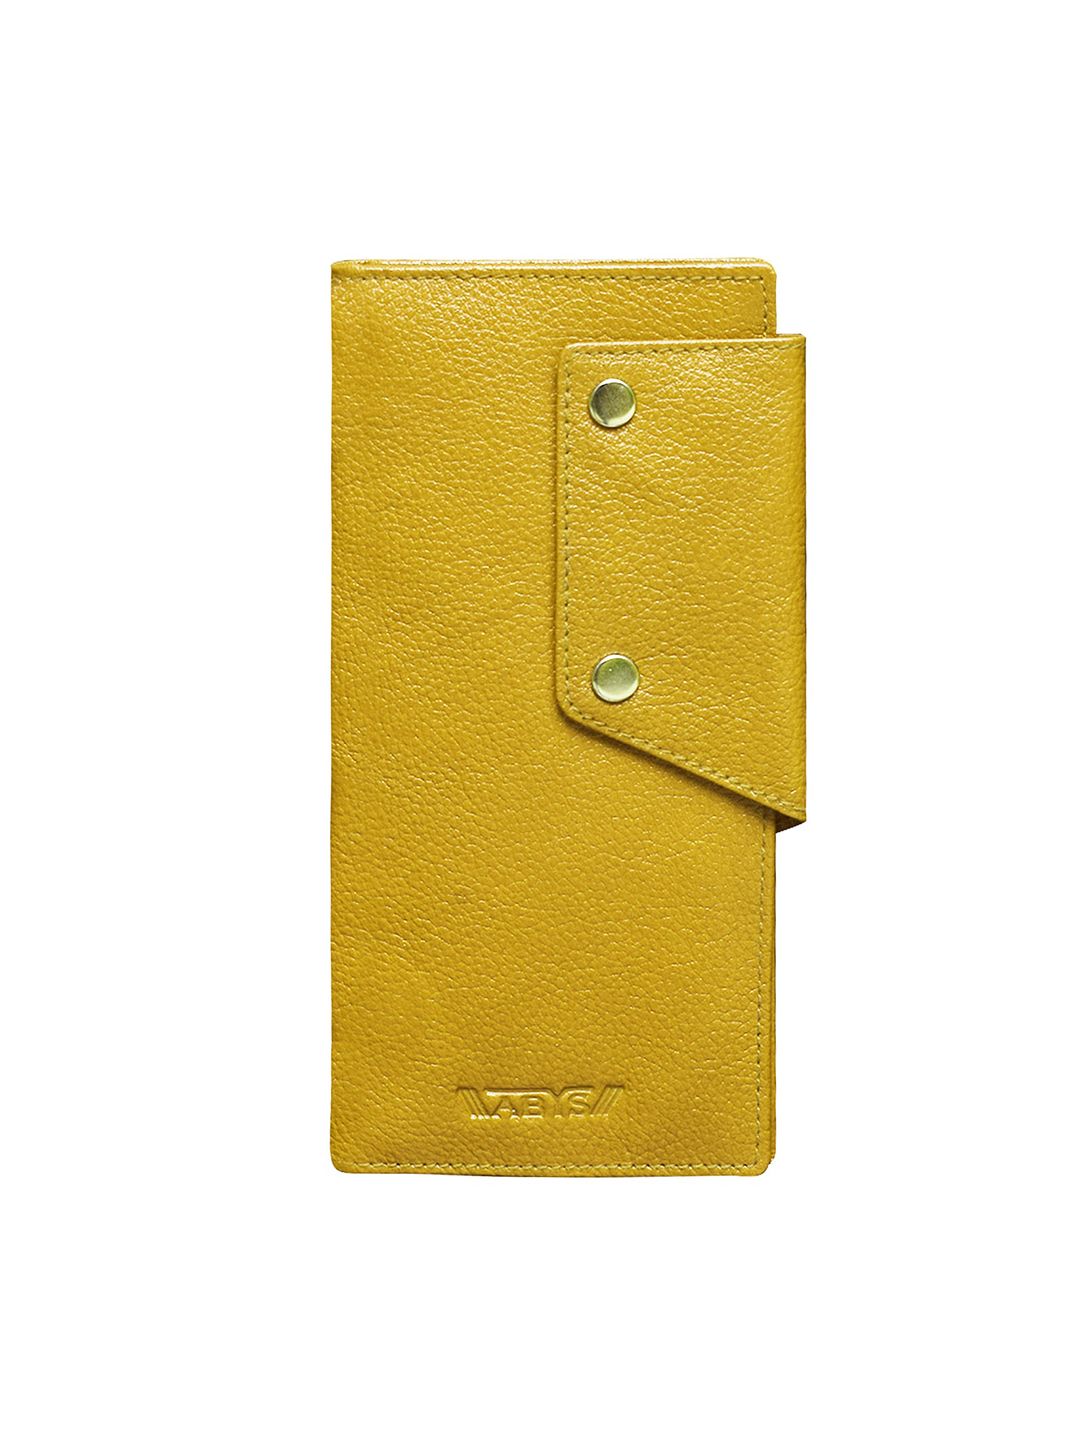 ABYS Unisex Yellow Leather Two Fold Wallet Price in India